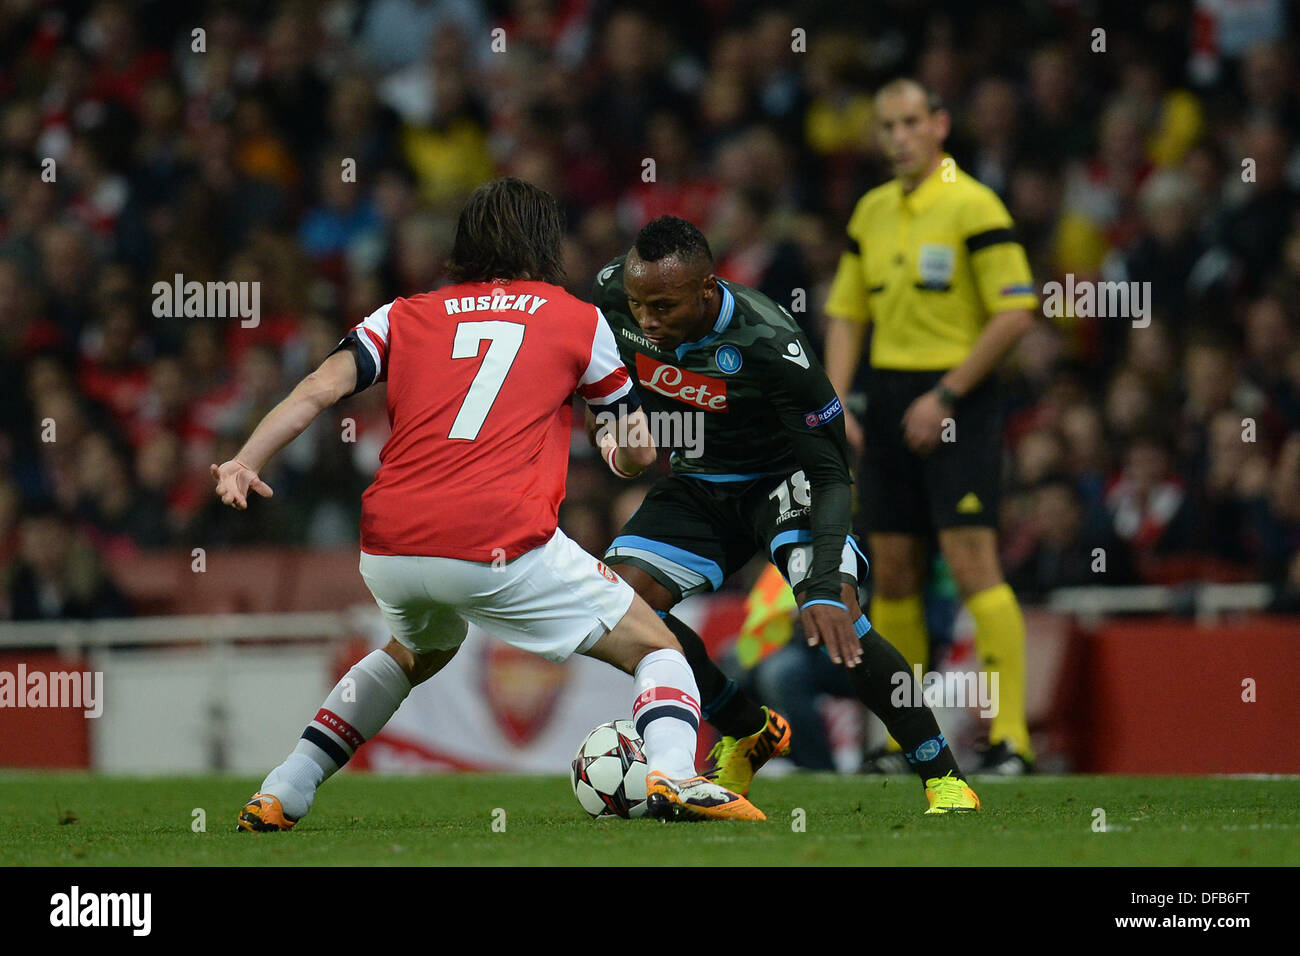 London, UK. 01st Oct, 2013. Arsenal's midfielder Tomas Rosicky from The Czech Republic and Napoli's defender Camilo Zuniga from Columbia during the UEFA Champions League match between Arsenal from England and Napoli from Italy played at The Emirates Stadium, on October 01, 2013 in London, England. © Mitchell Gunn/ESPA/Alamy Live News Stock Photo